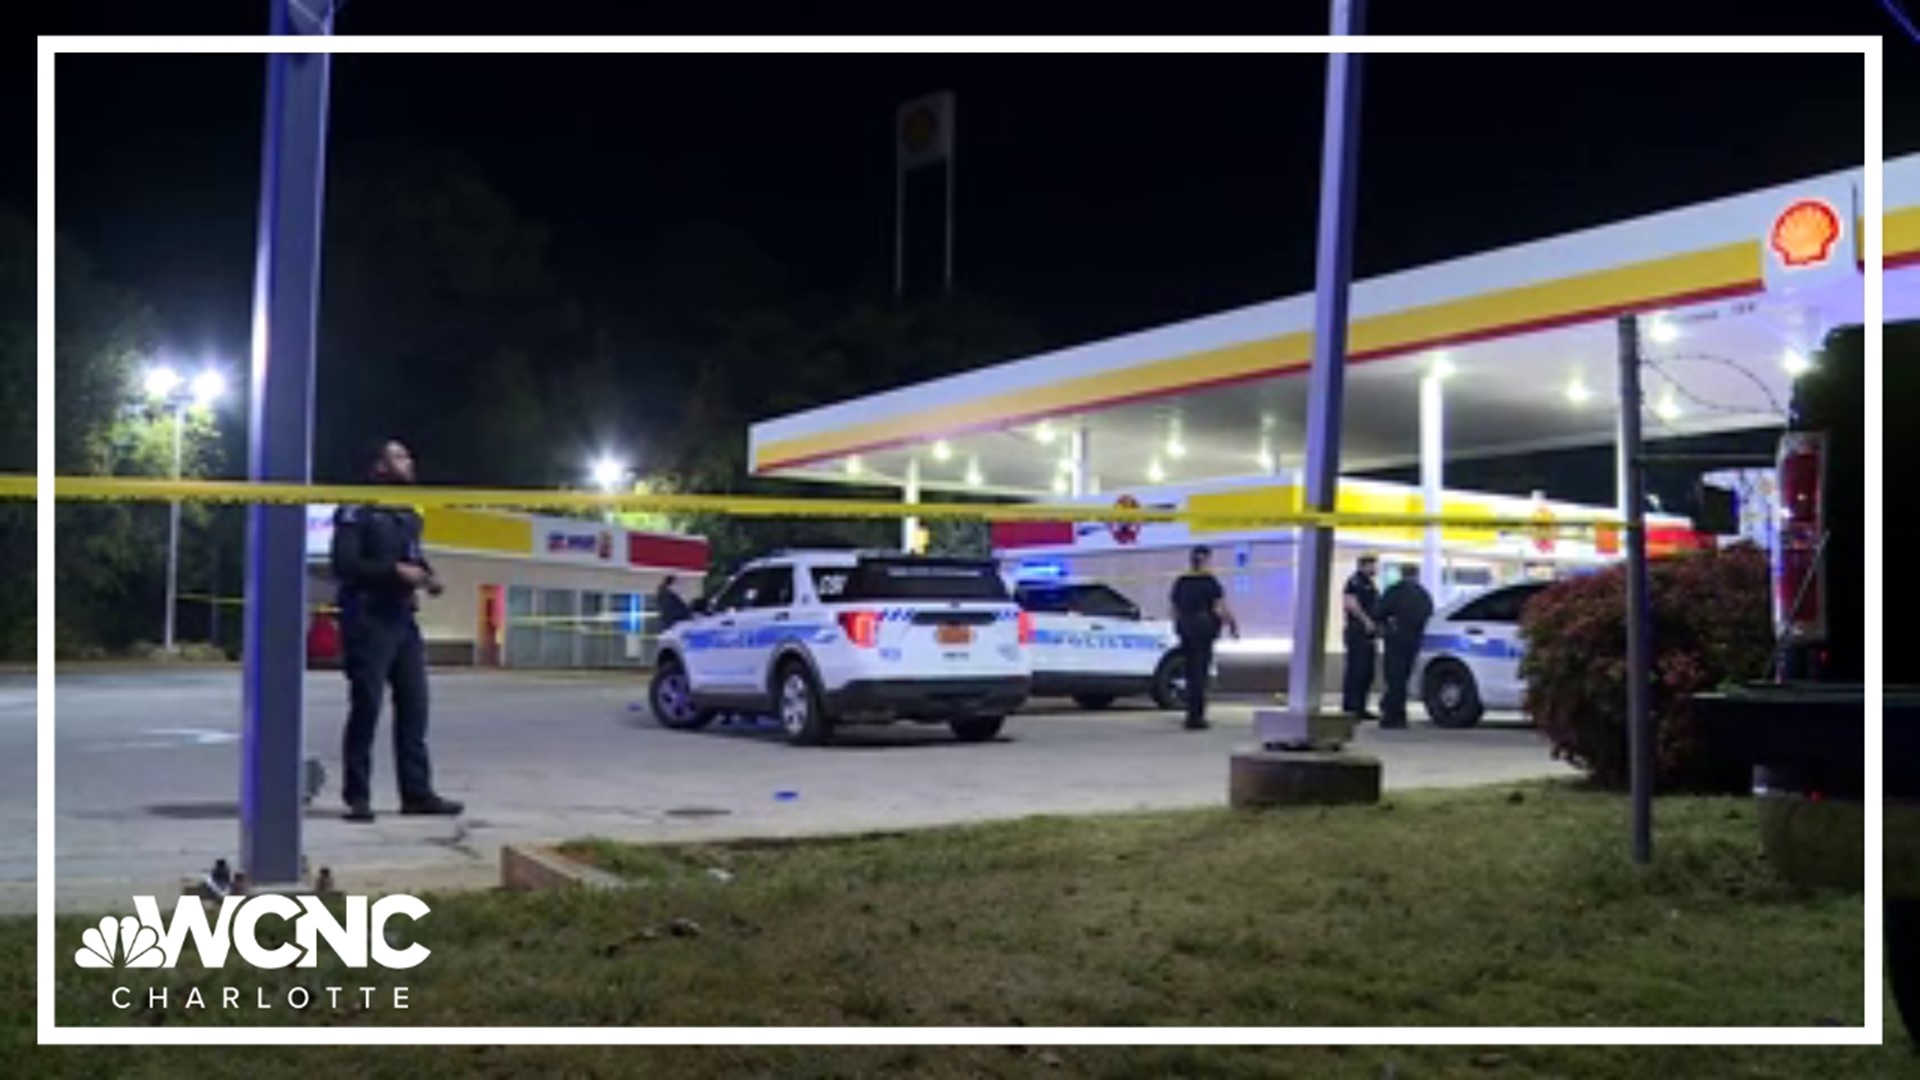 Charlotte-Mecklenburg police responded to a reported shooting at the Sam's Mart along Beatties Ford Road just south of I-85 around 11:30 p.m. Tuesday.